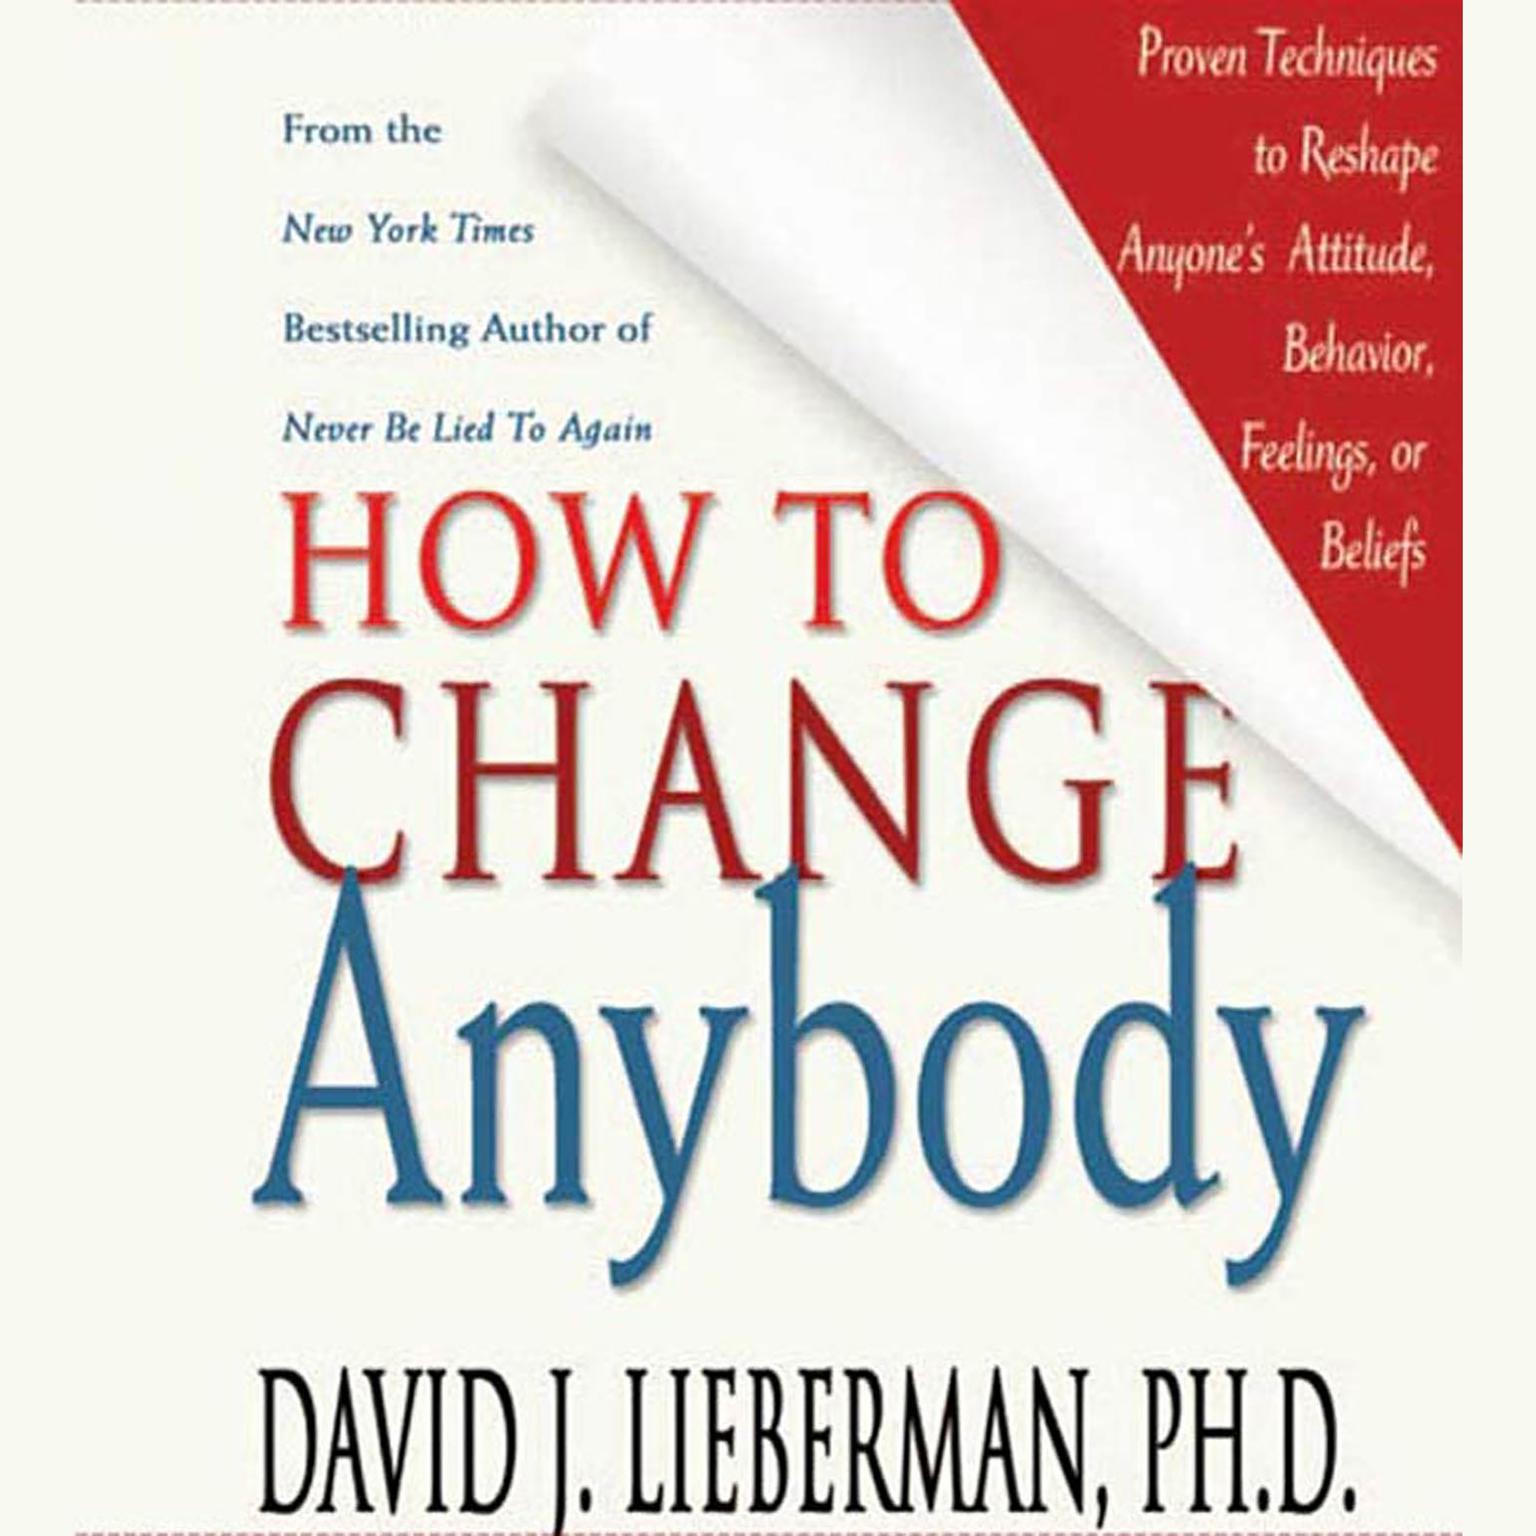 How to Change Anybody (Abridged): Proven Techniques to Reshape Anyones Attitude, Behavior, Feelings, or Beliefs Audiobook, by David J. Lieberman